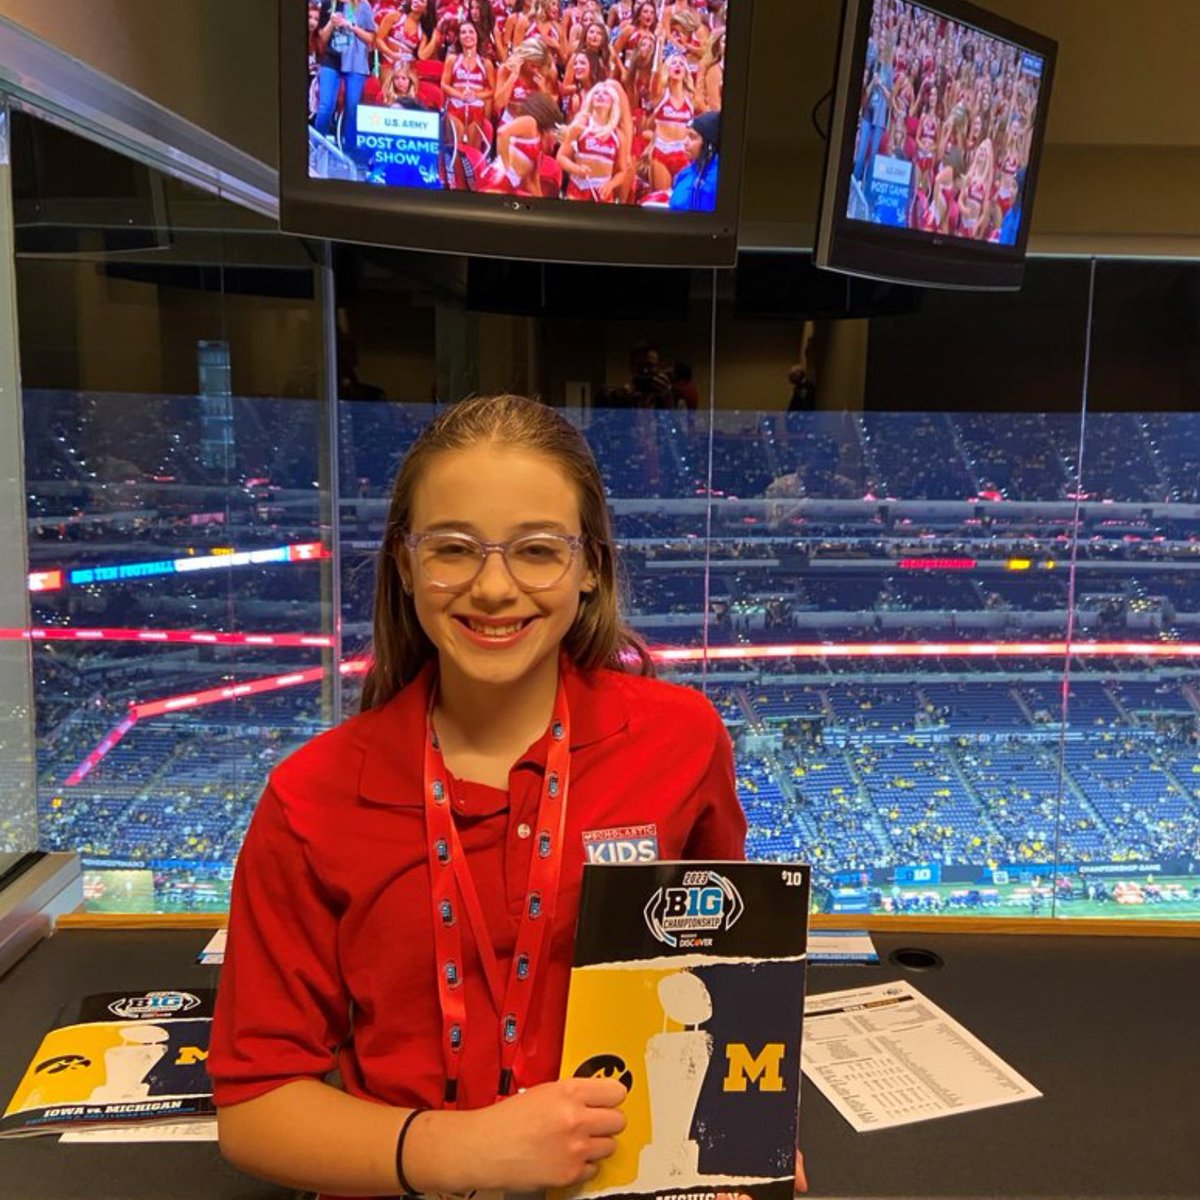 Do you know an aspiring journalist? The @Scholastic Kid Reporter application period for the 2024-2025 program closes on June 1! Kids ages 10-14 can apply to join the #ScholasticKidsPress here: bit.ly/3UIBxjY